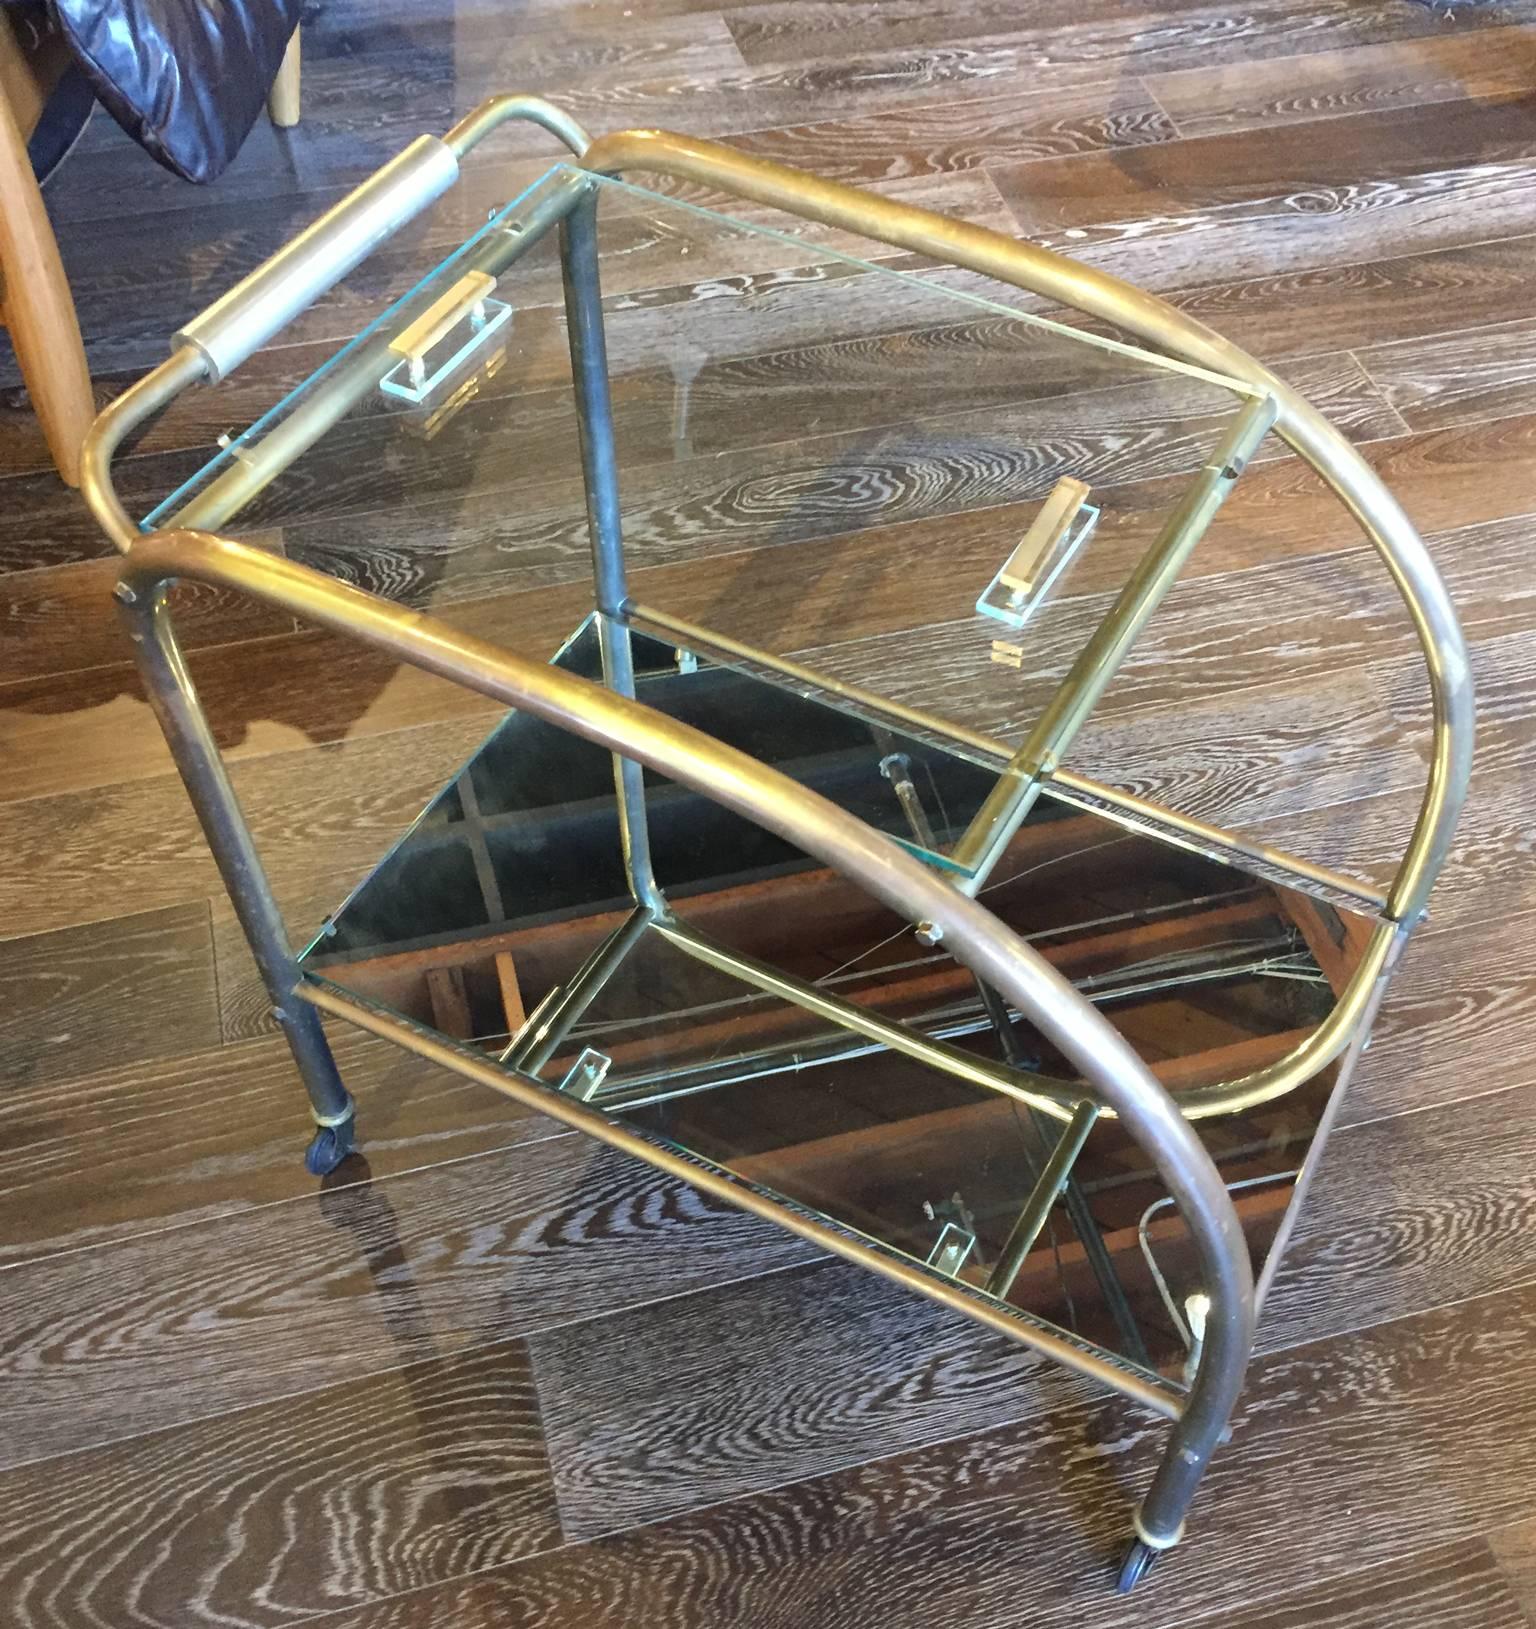 Beautiful bar cart in antiqued brass with a chrome handle. Top glass piece has handles to use for serving. Bottom glass tier is mirrored. Cart on wheels. In good condition.